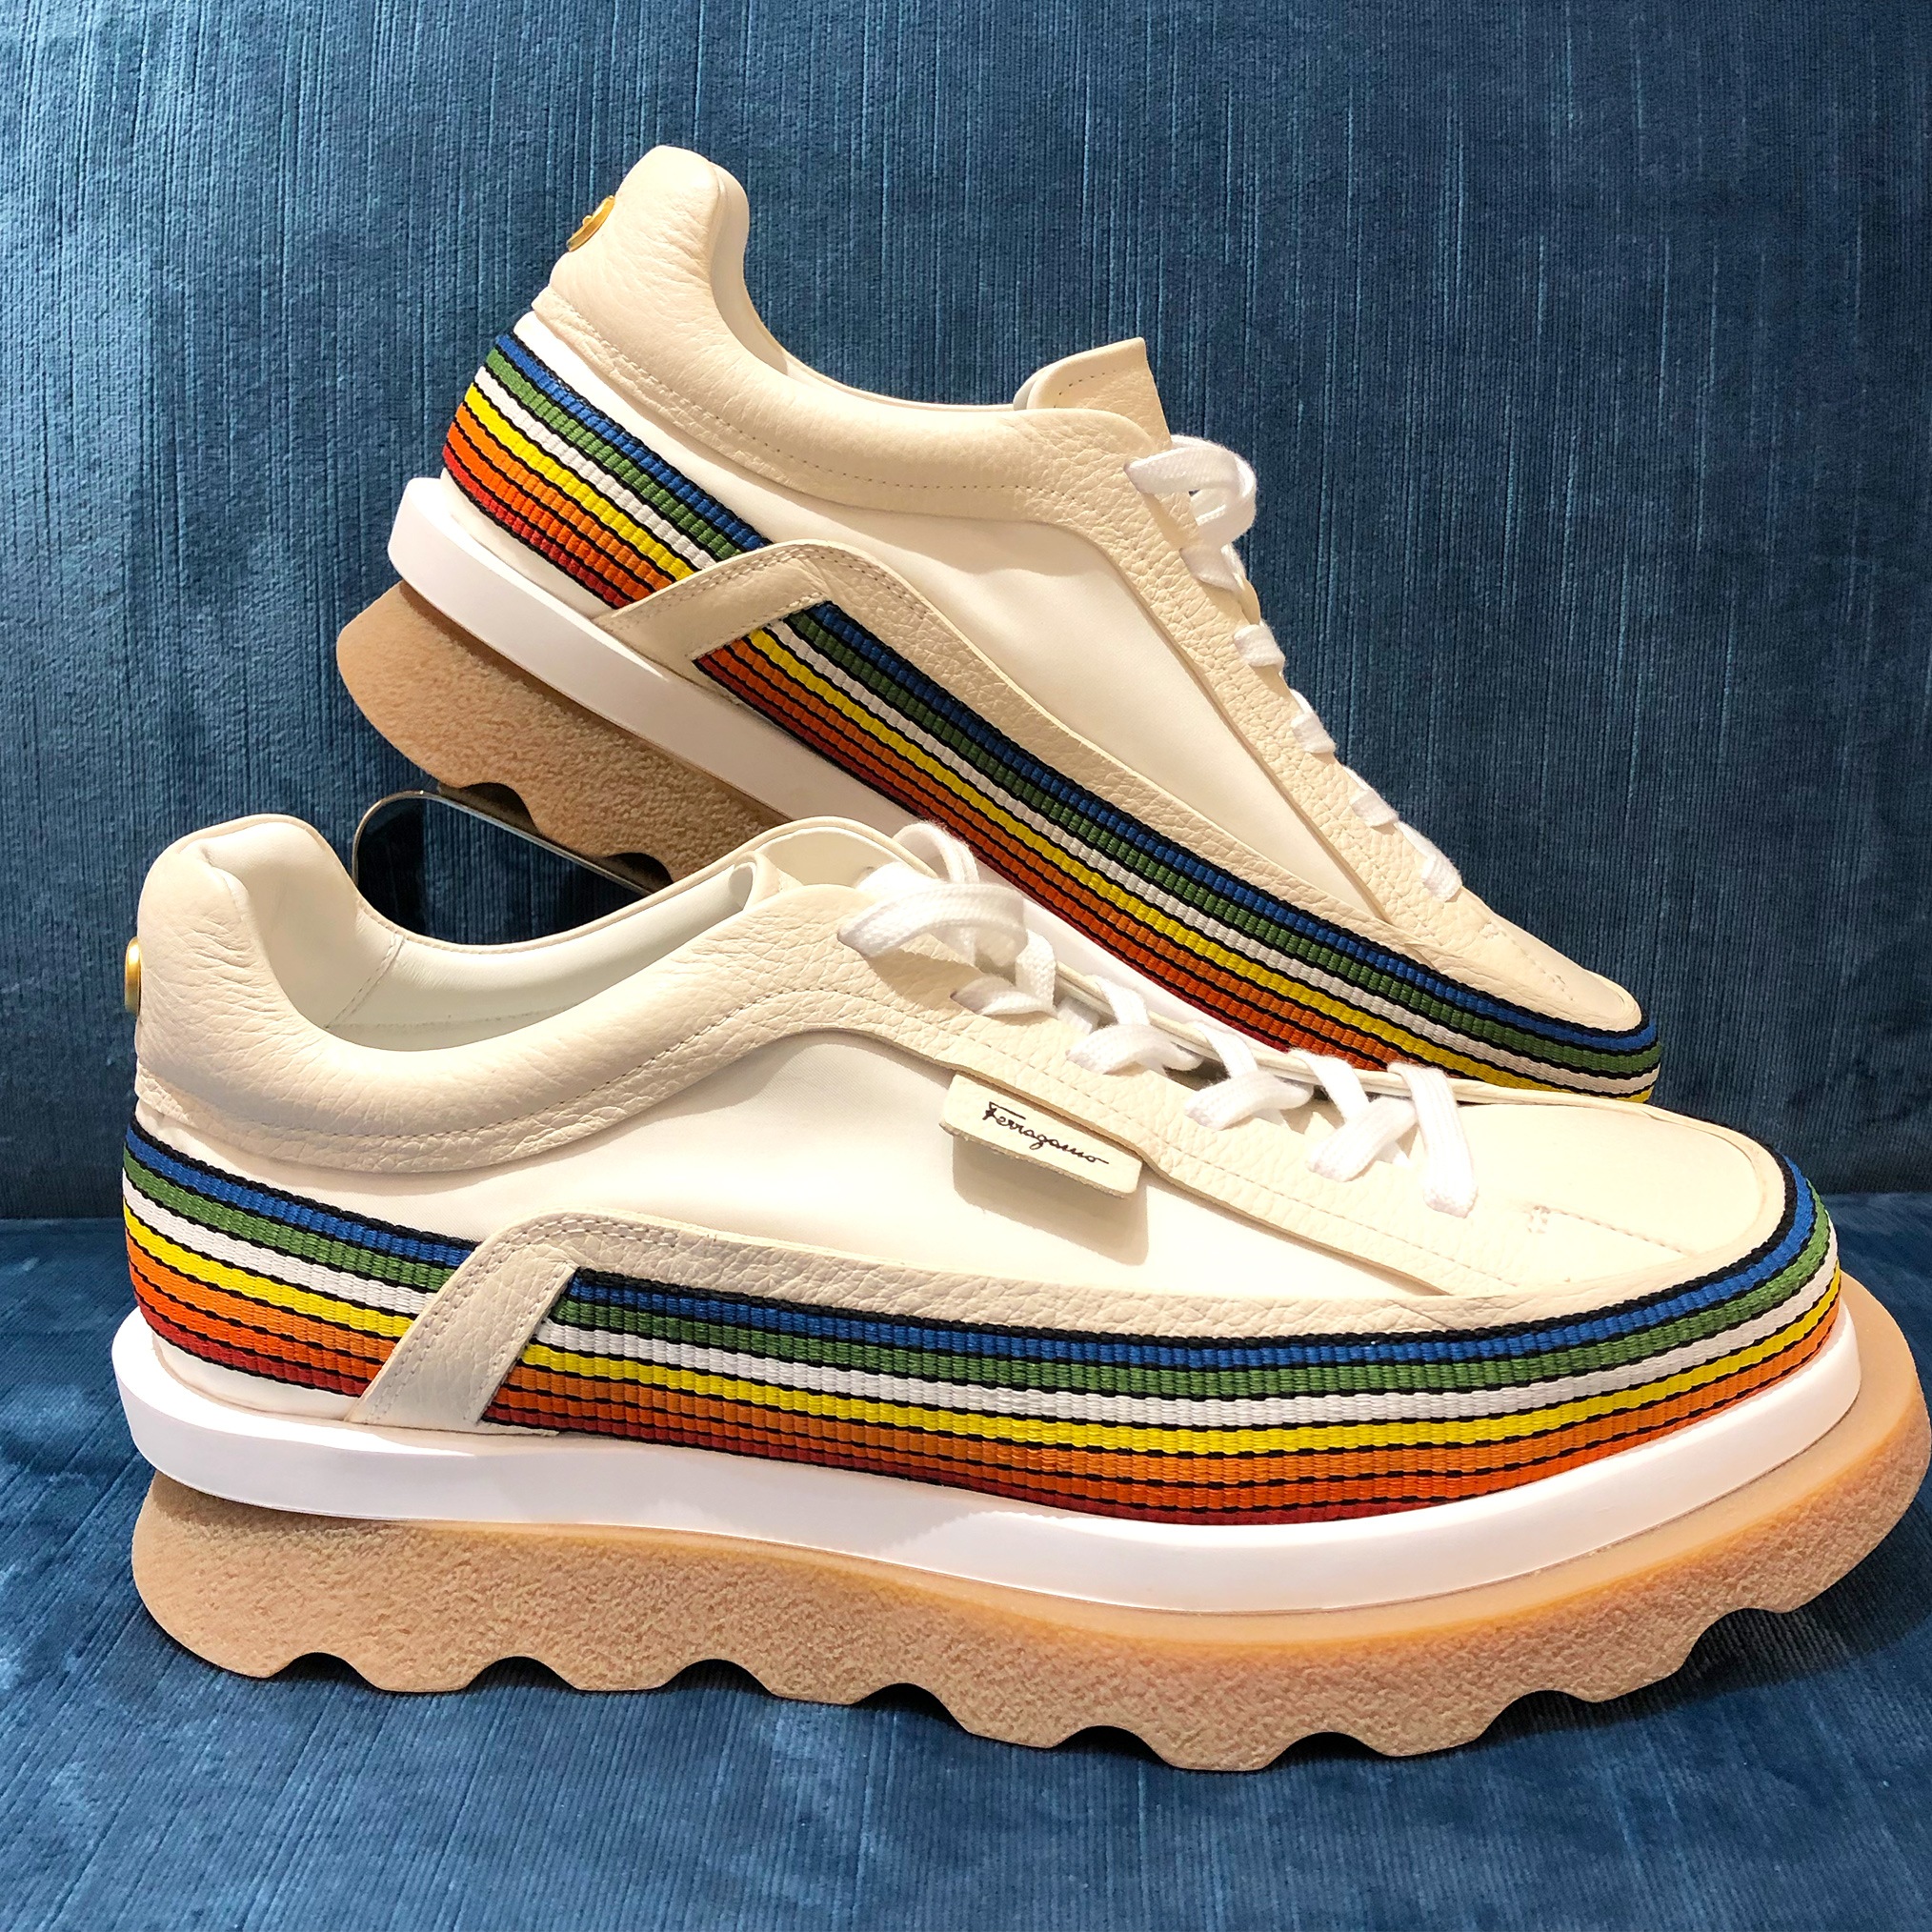 Salvatore Ferragamo Sustainable Thinking Sneaker is set on a thick rubber sole, they are adorned with rainbow pattern